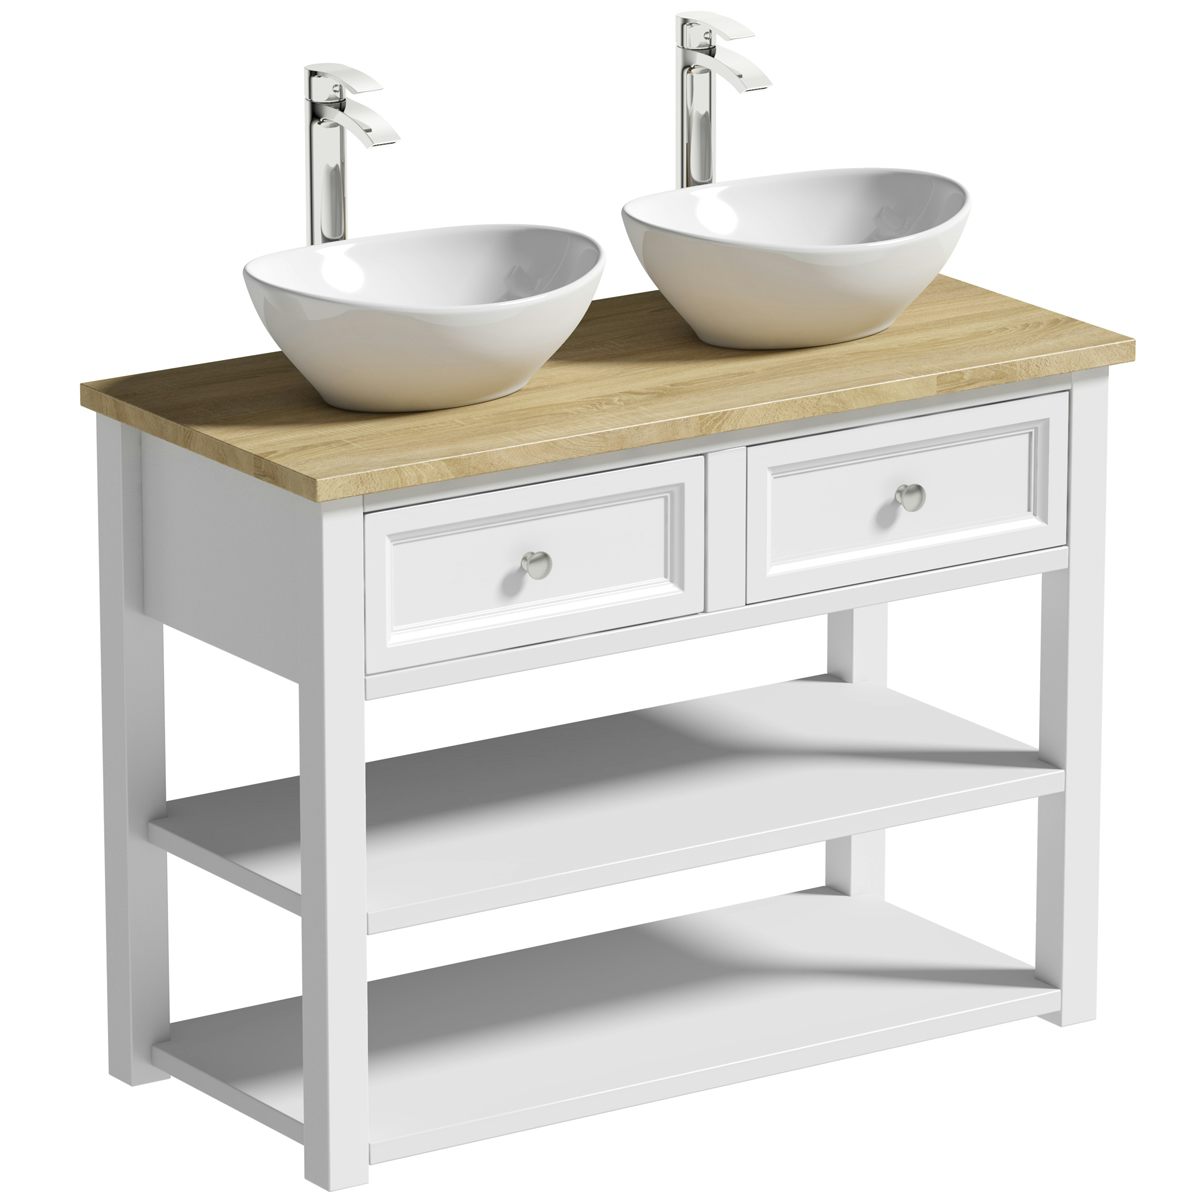 The Bath Co Marlow 1040mm Double Washstand With Countertop Basins